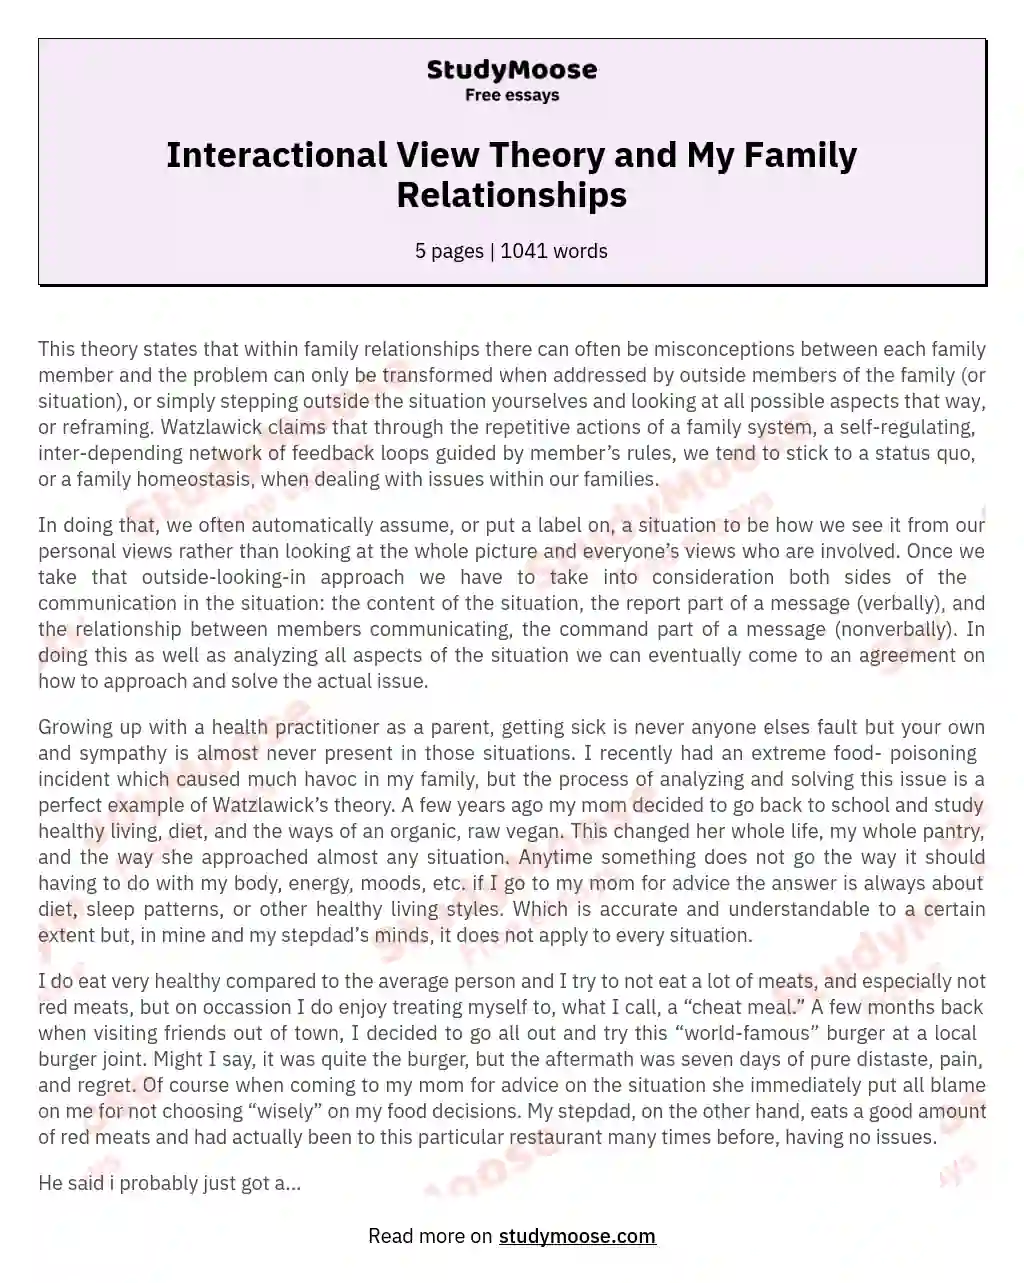 Interactional View Theory and My Family Relationships